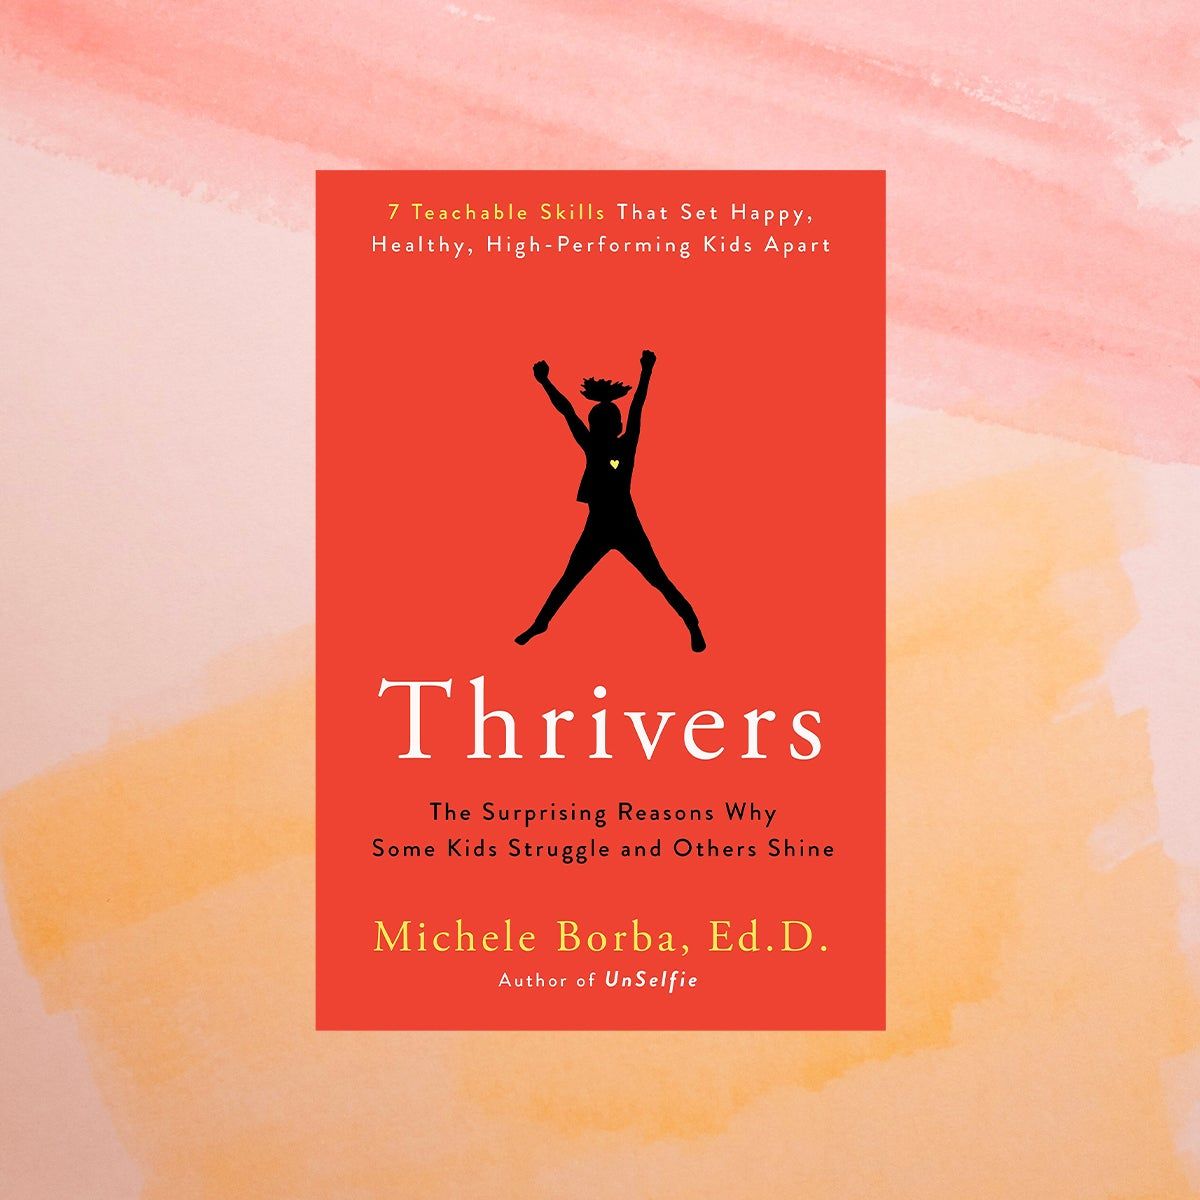 Thrivers by Michele Borba book cover